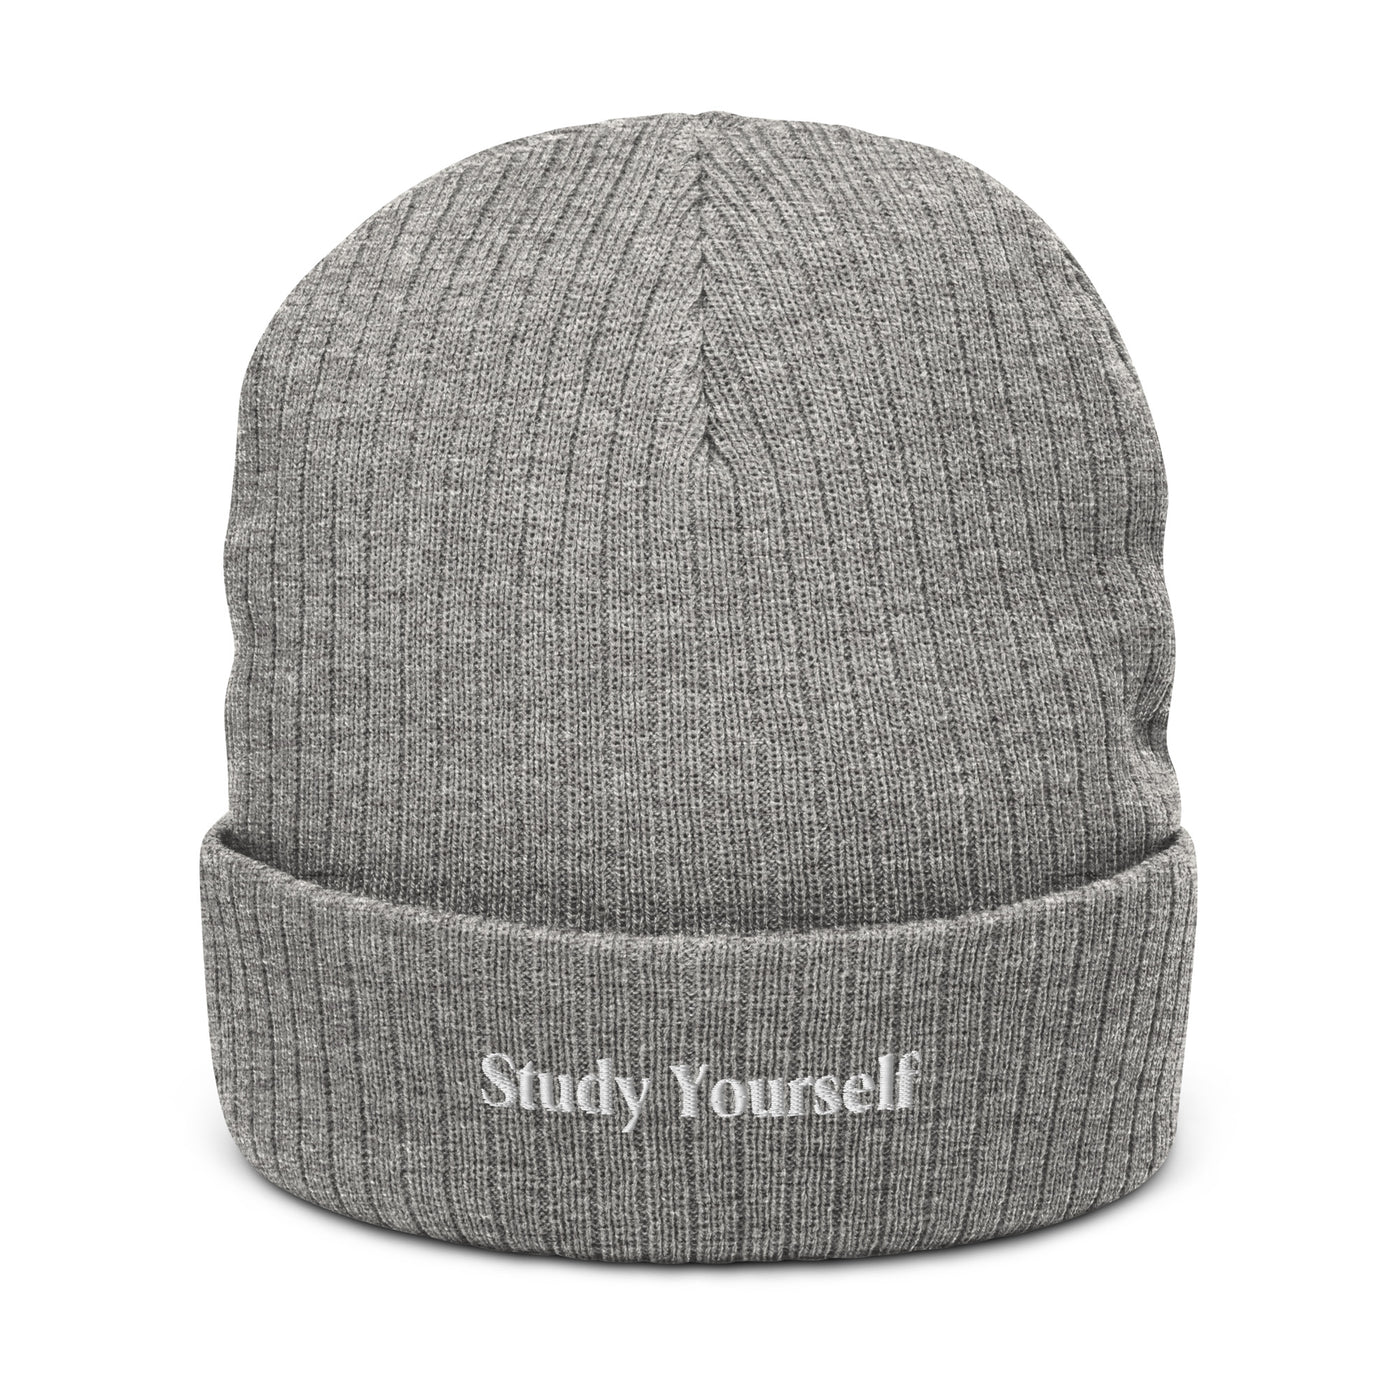 Study Yourself Recycled Cuffed Beanie